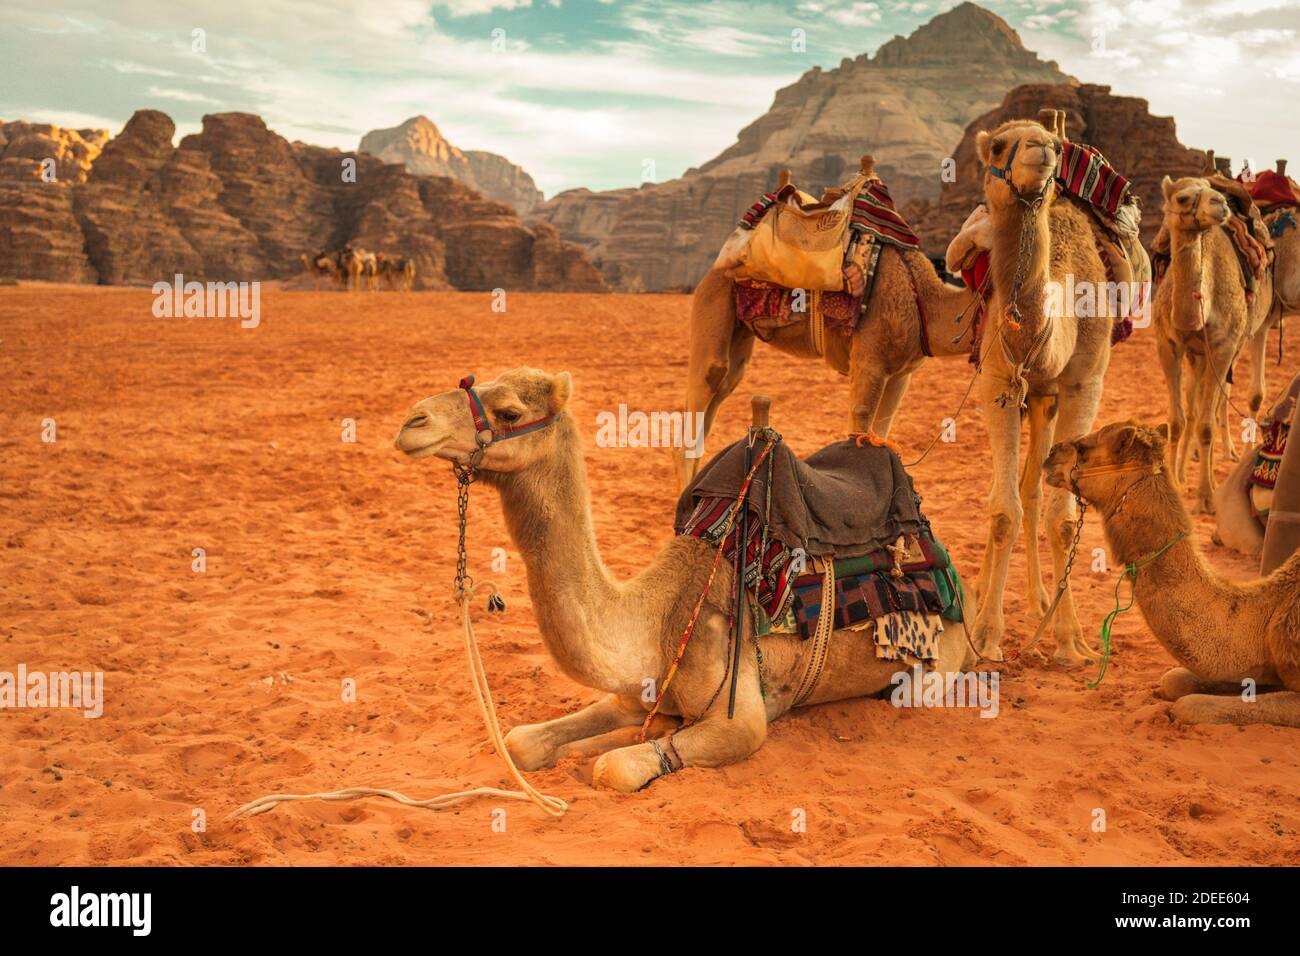 camels in incredible landscape in Wadi Rum in the Jordanian desert at sunset Stock Photo